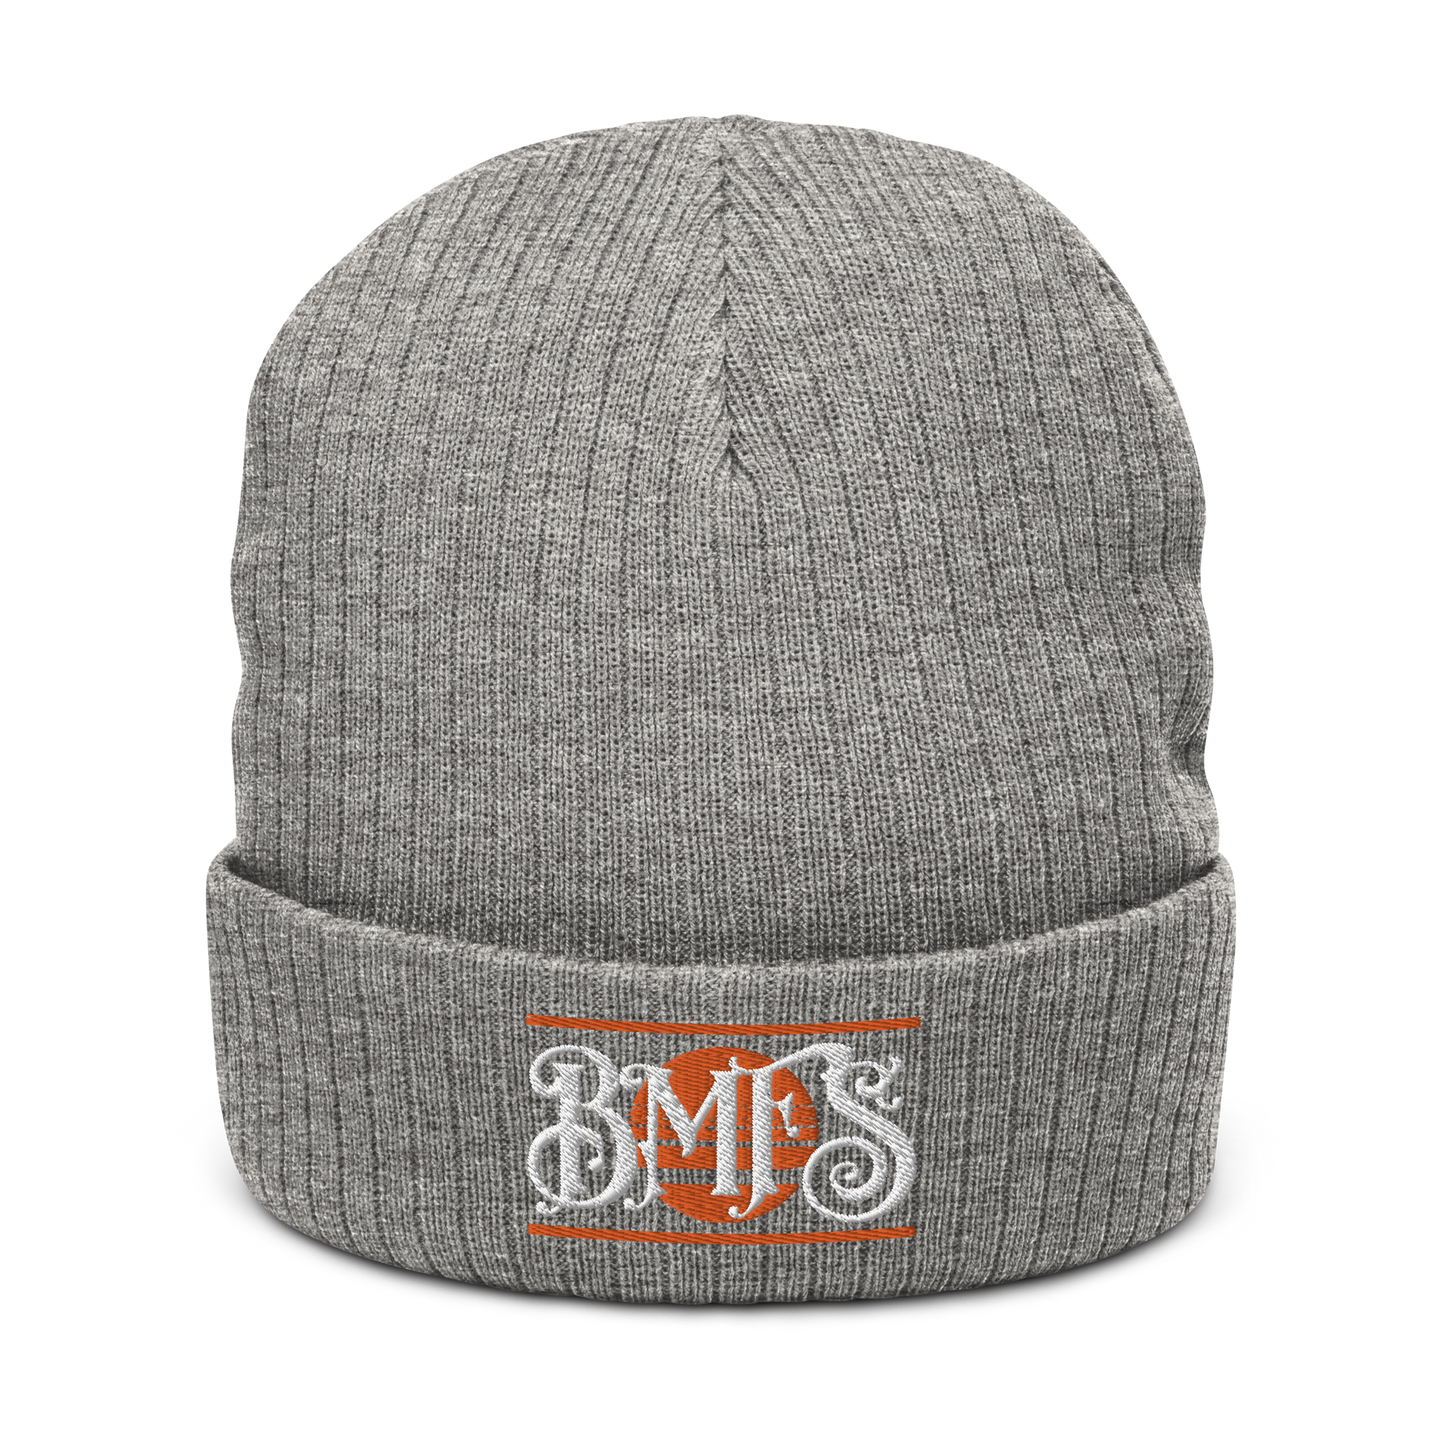 BMFS Sun Cuffed Beanie | Flat Embroidery | Ribbed | Inspired Billy Art